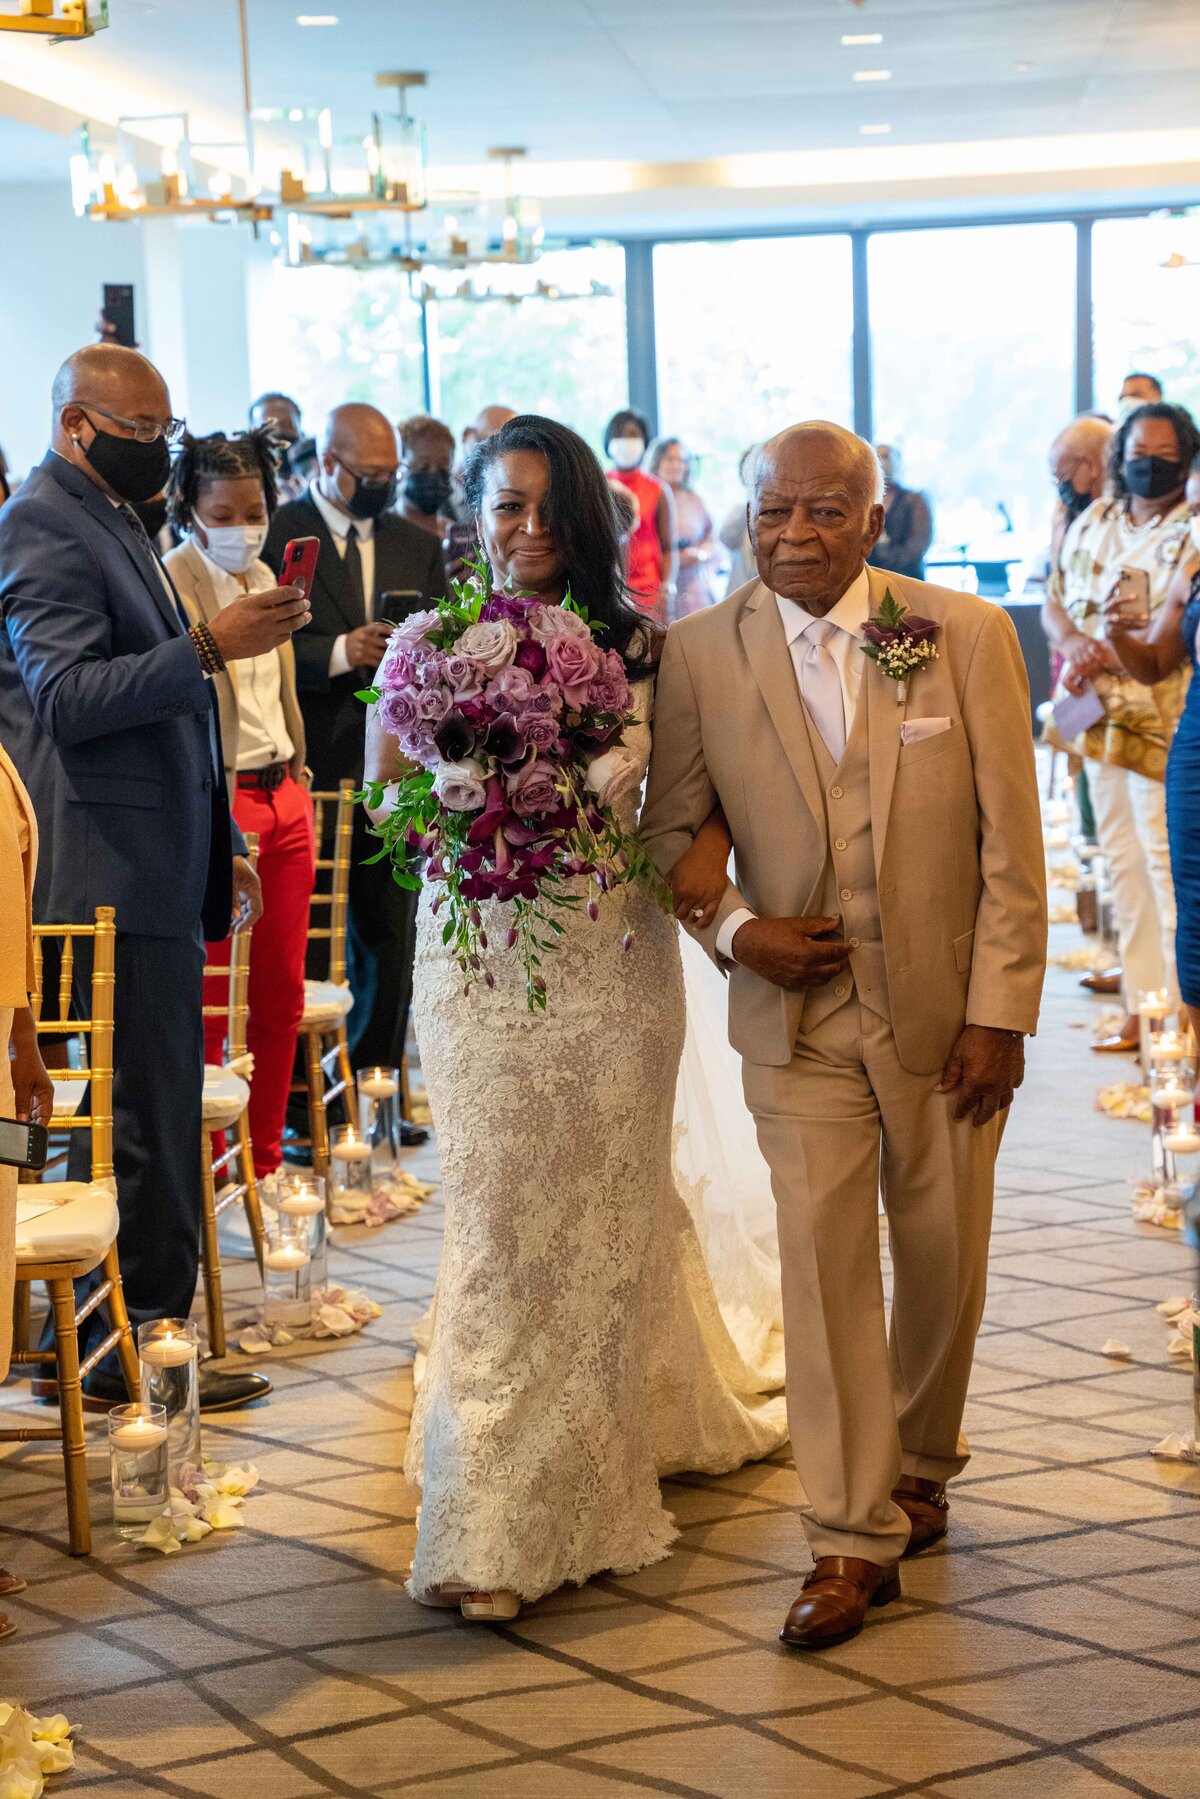 Bride is walked down the aisle by her father at the InterContinental Washington D.C.